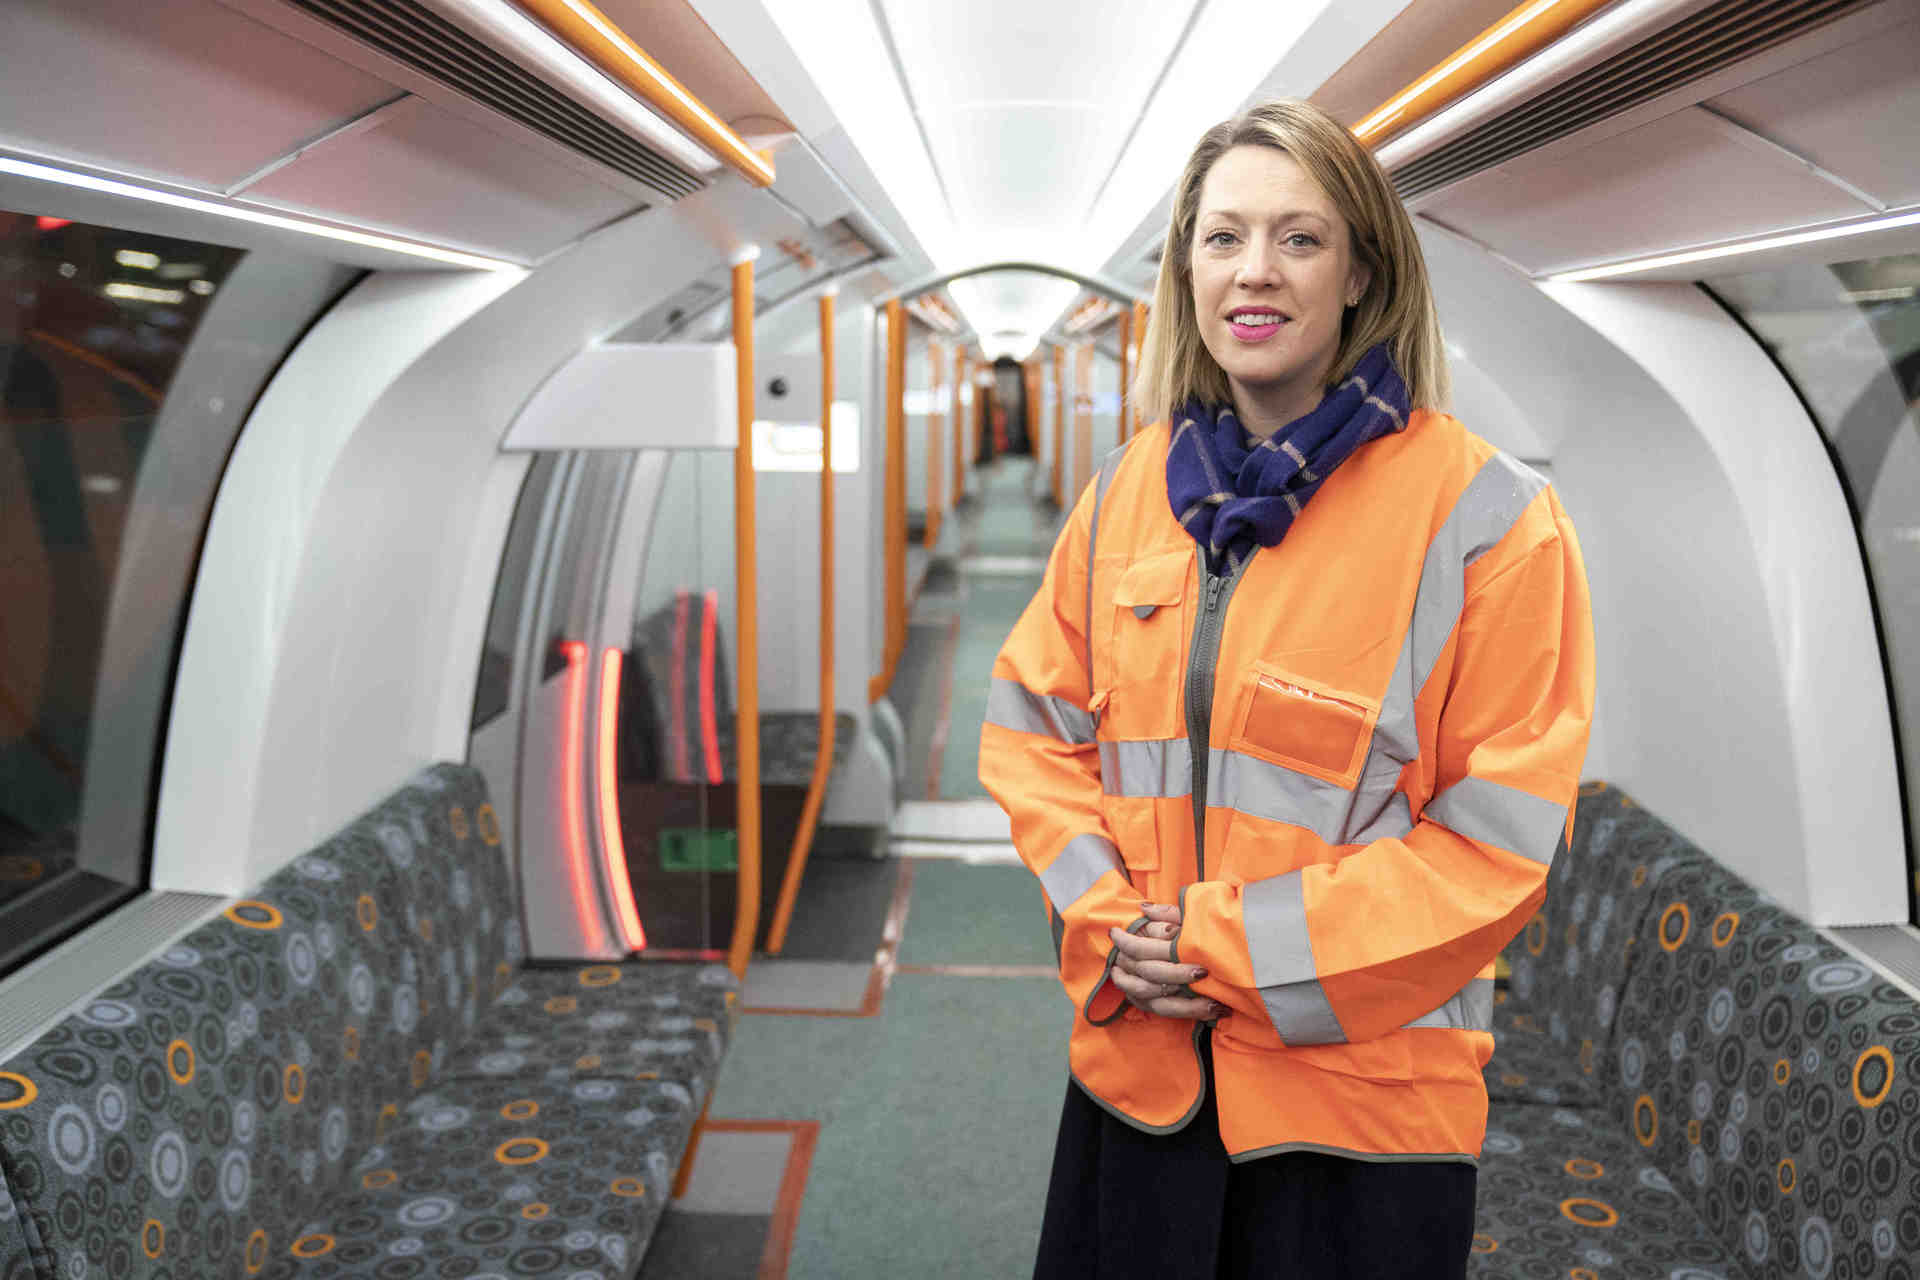 Transport minister Jenny Gilruth visited SPT’s subway depot in Govan to view the new trains which are currently being tested.